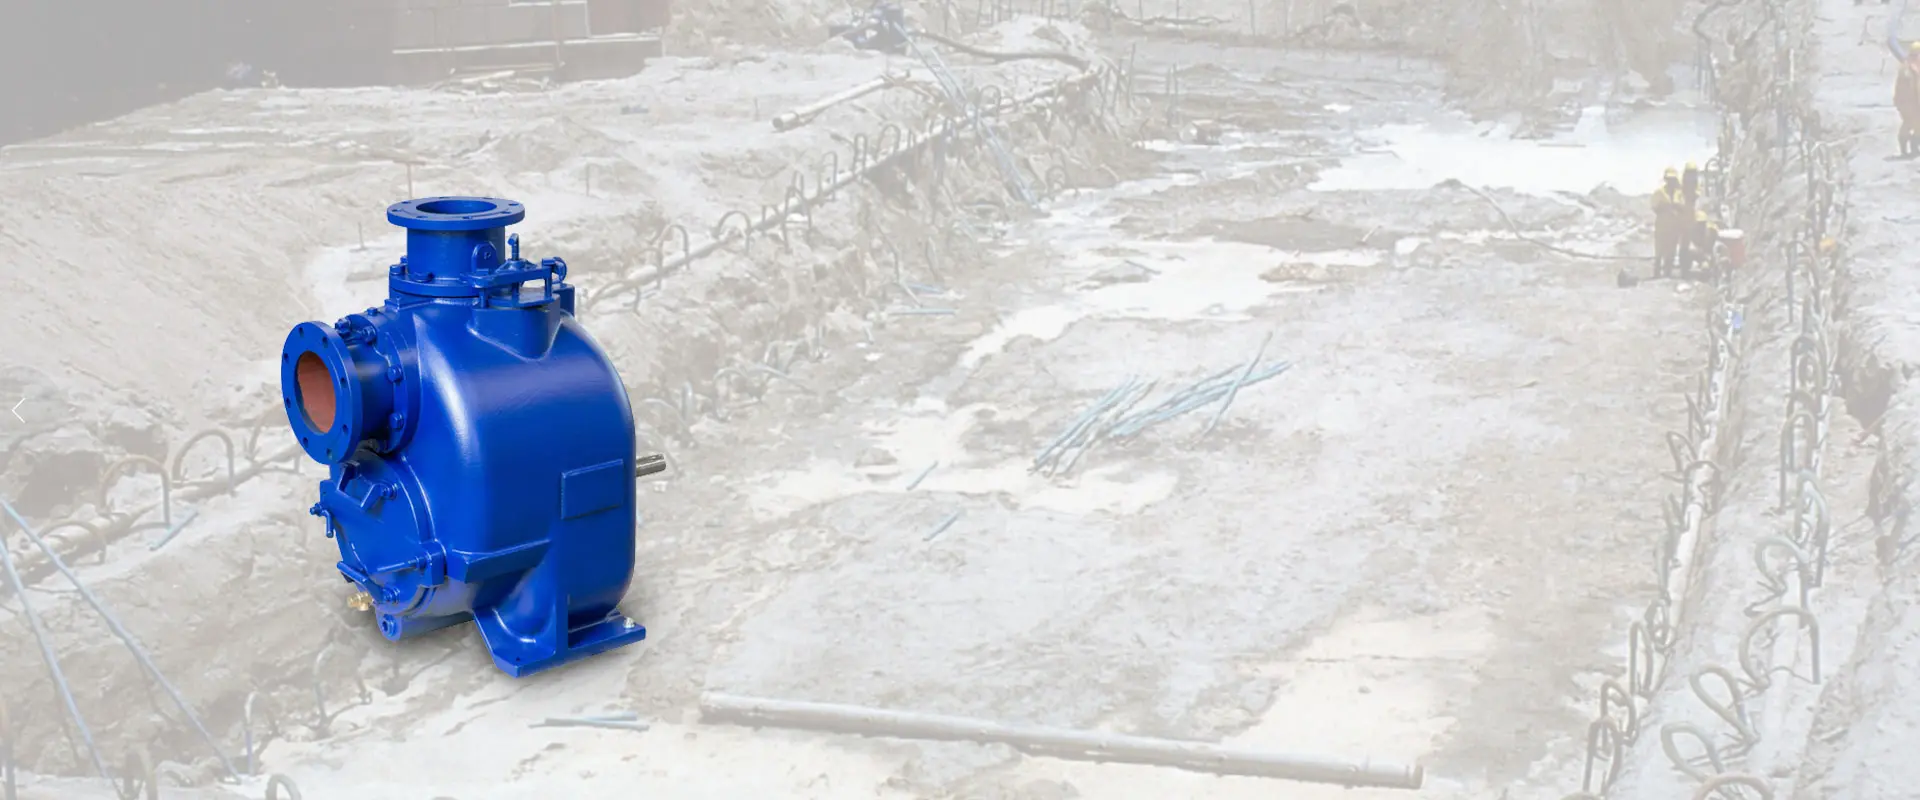 A Trusted Partner In Industrial Pump Solutions